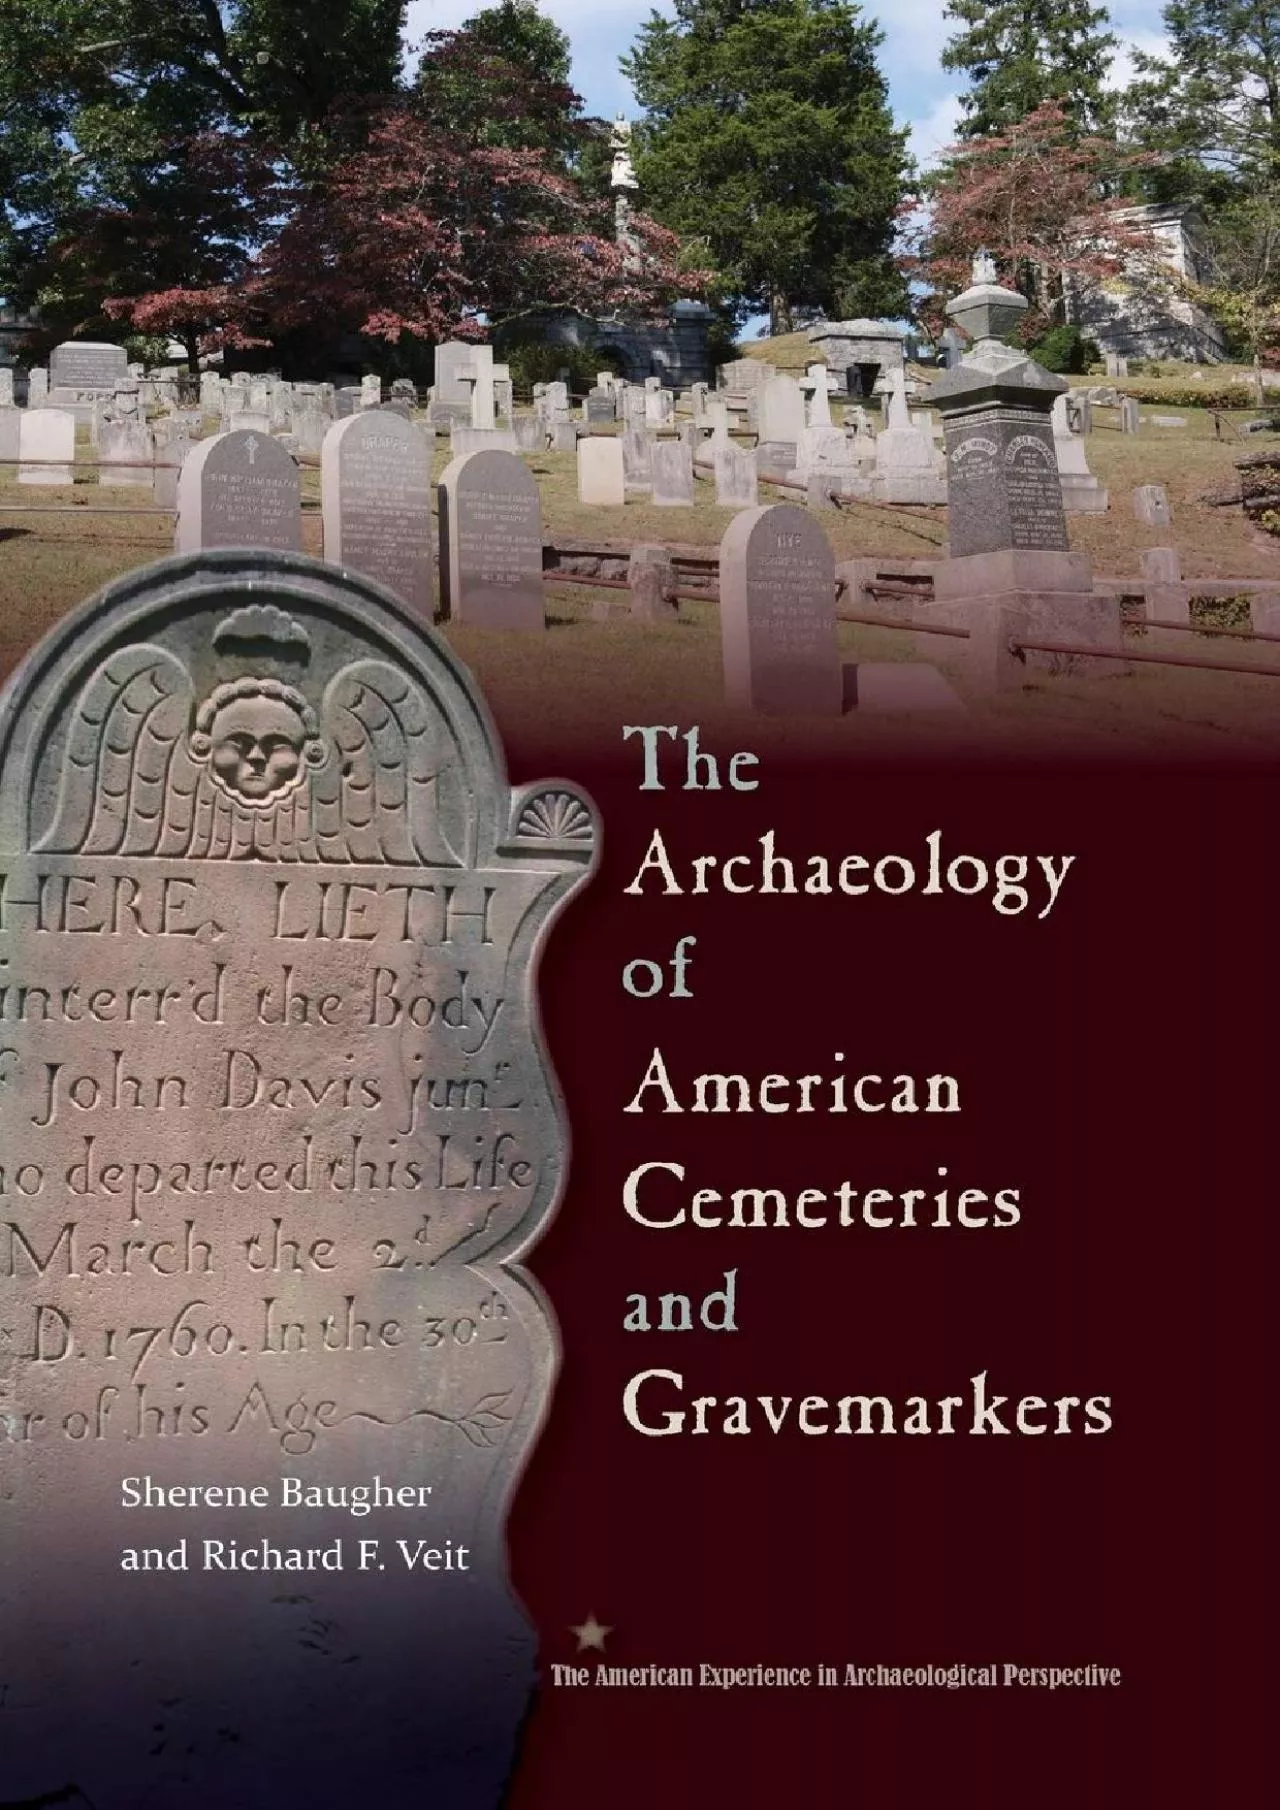 (DOWNLOAD)-The Archaeology of American Cemeteries and Gravemarkers (American Experience